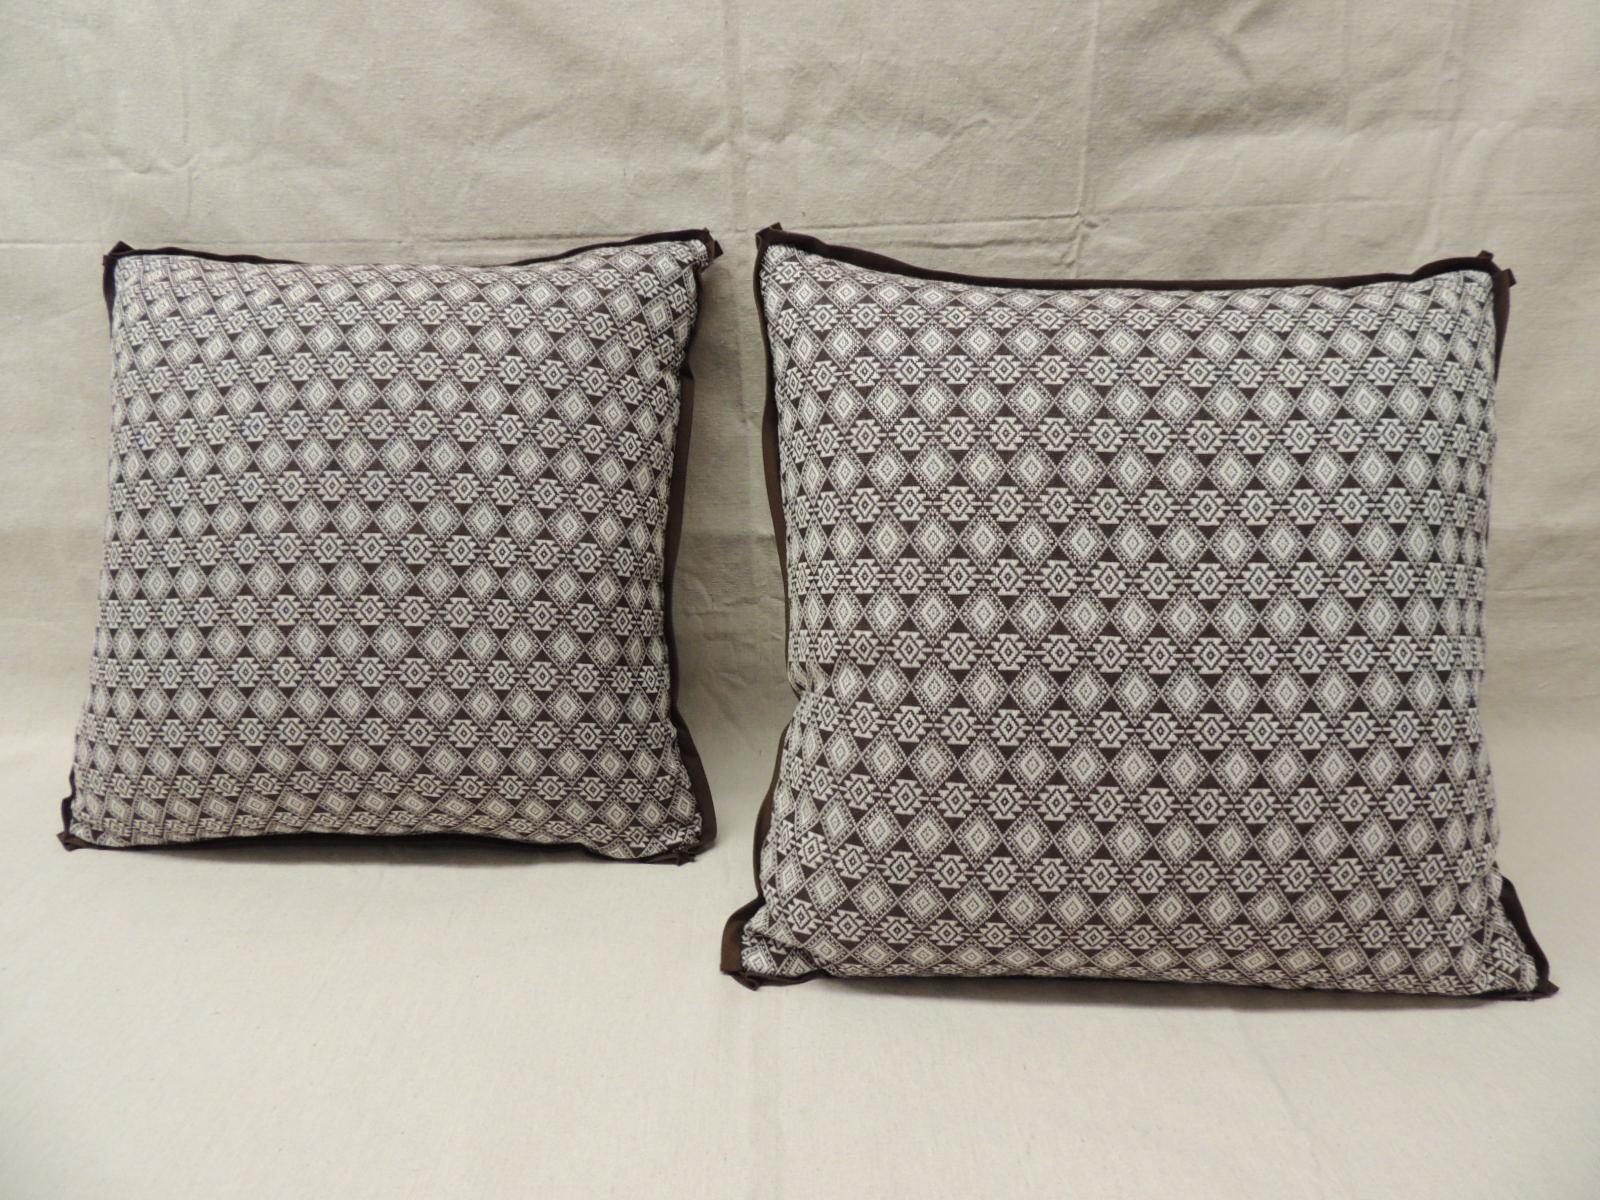 Hand-Crafted Pair of Brown and White Woven Swedish Decorative Pillows